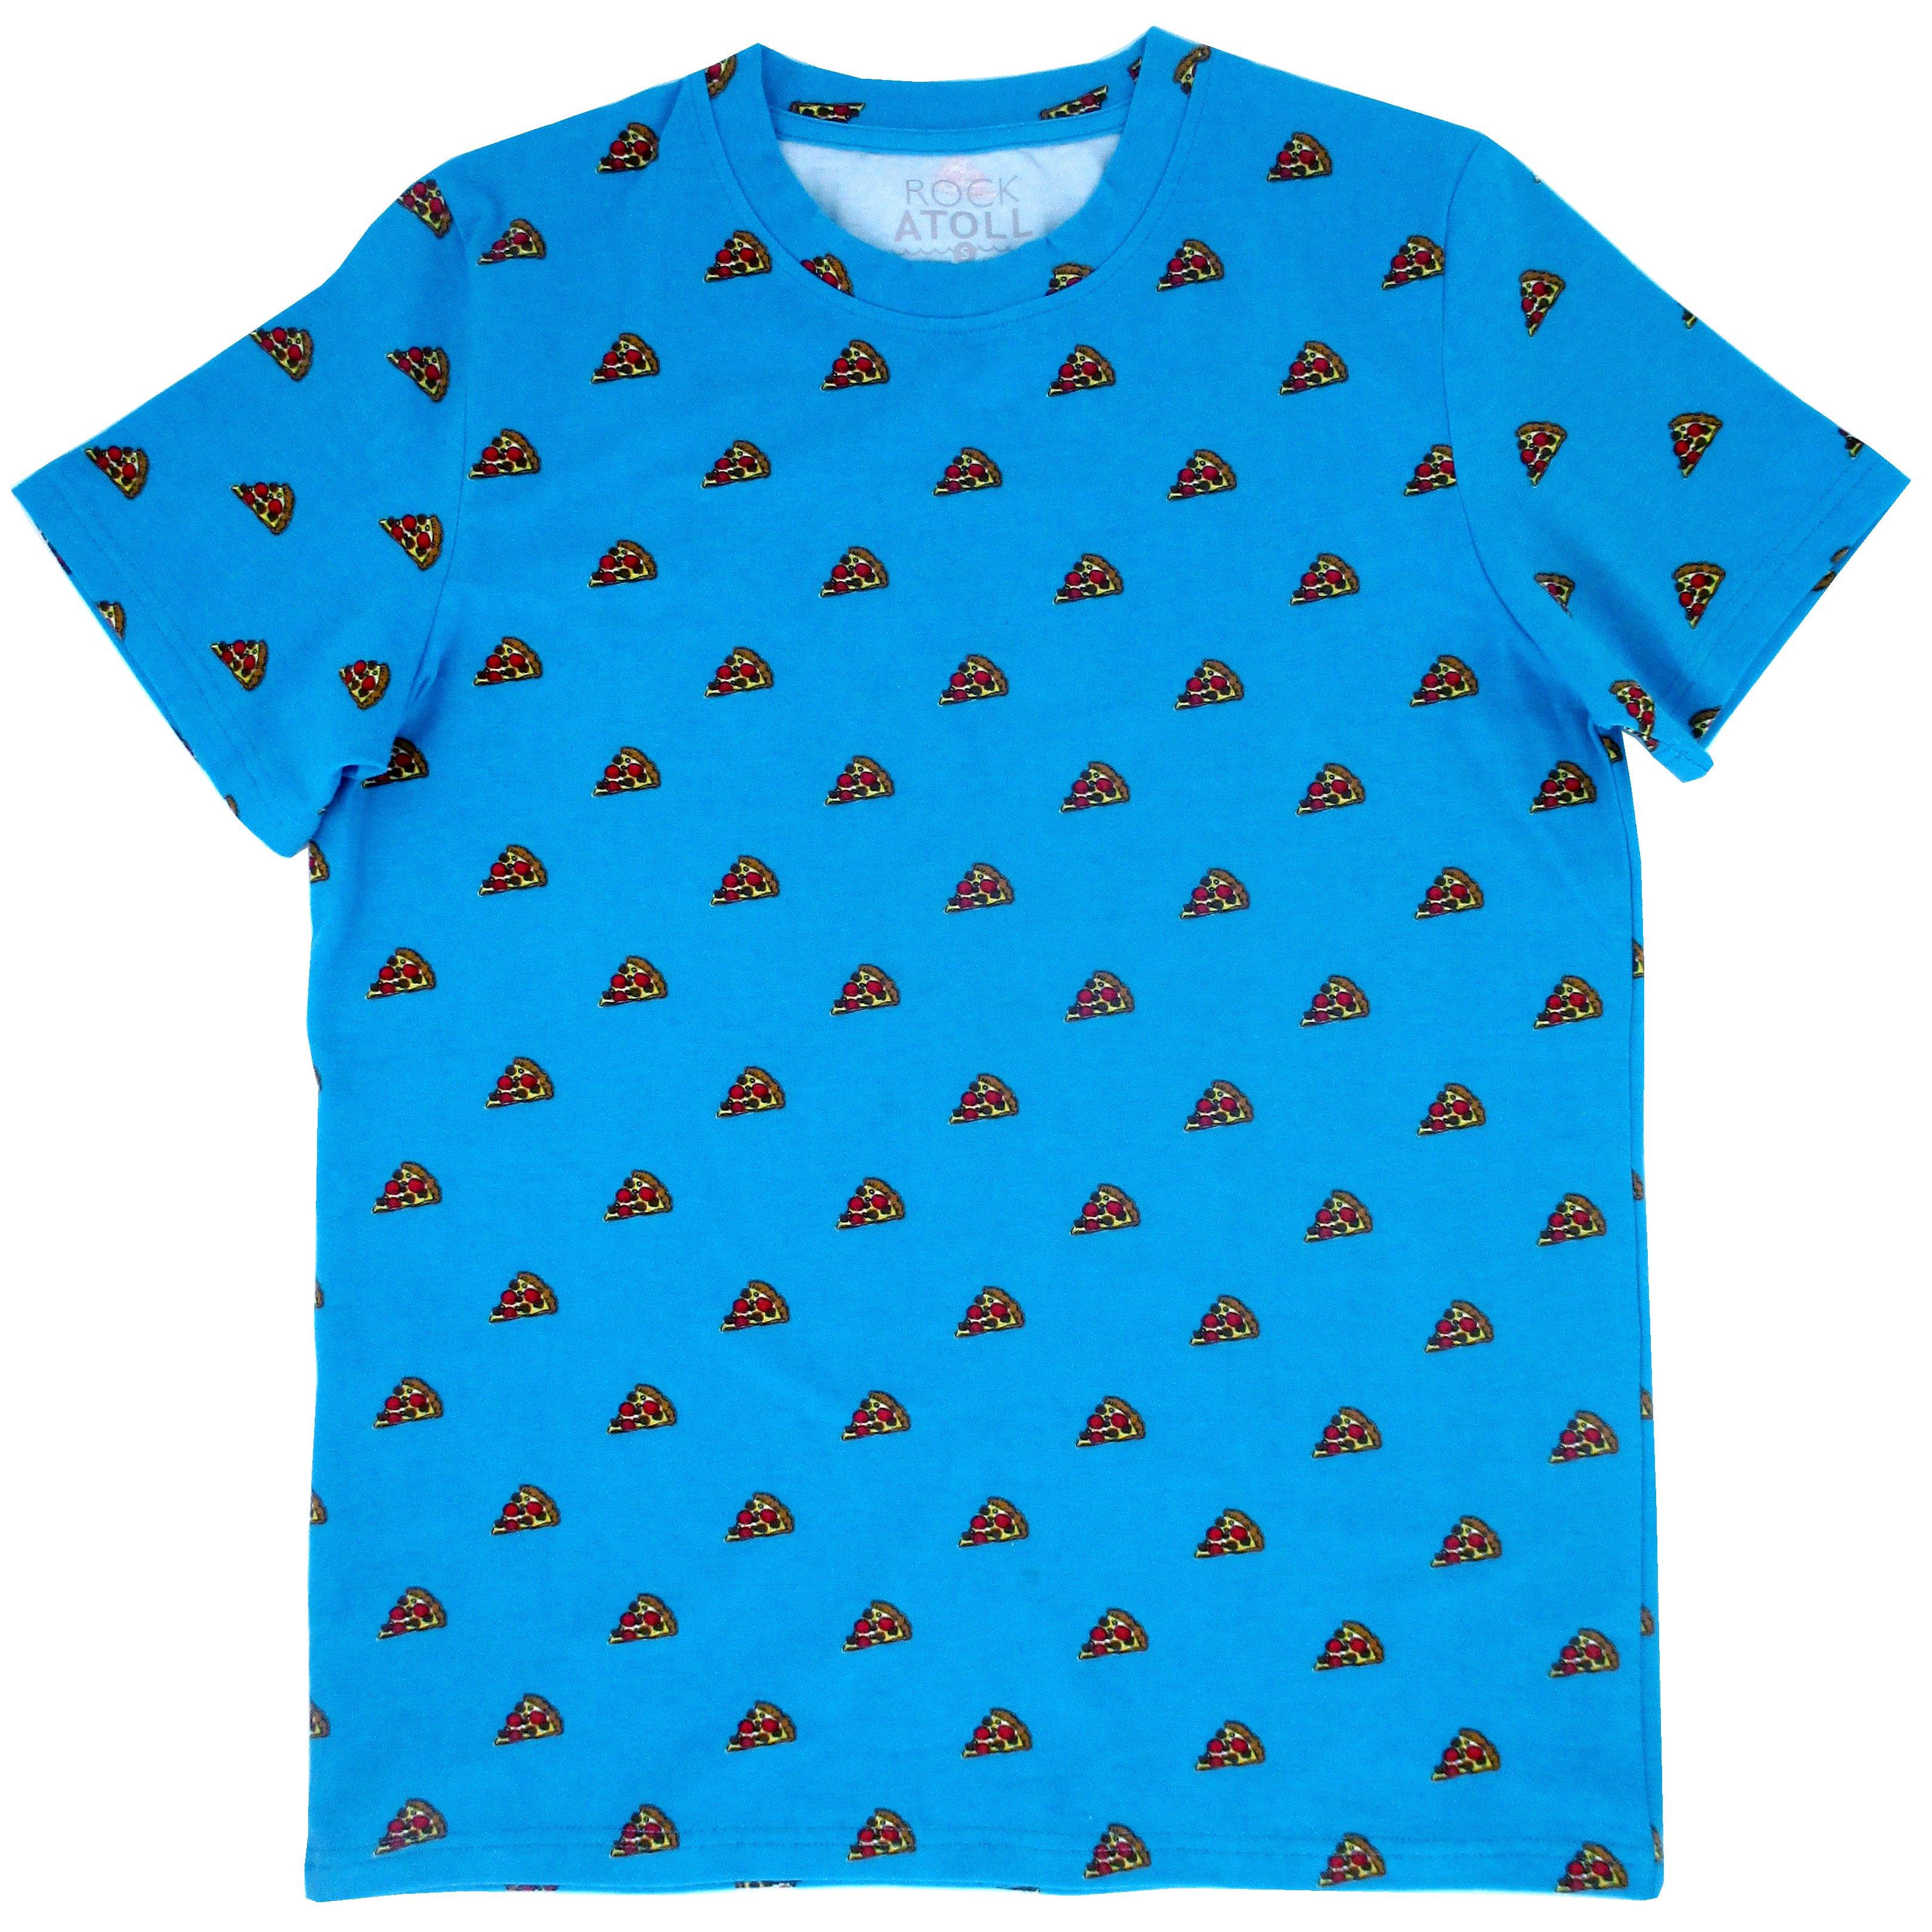 Round Neck Pizza Lover Pizza Slice Patterned Graphic Tee in Teal Blue